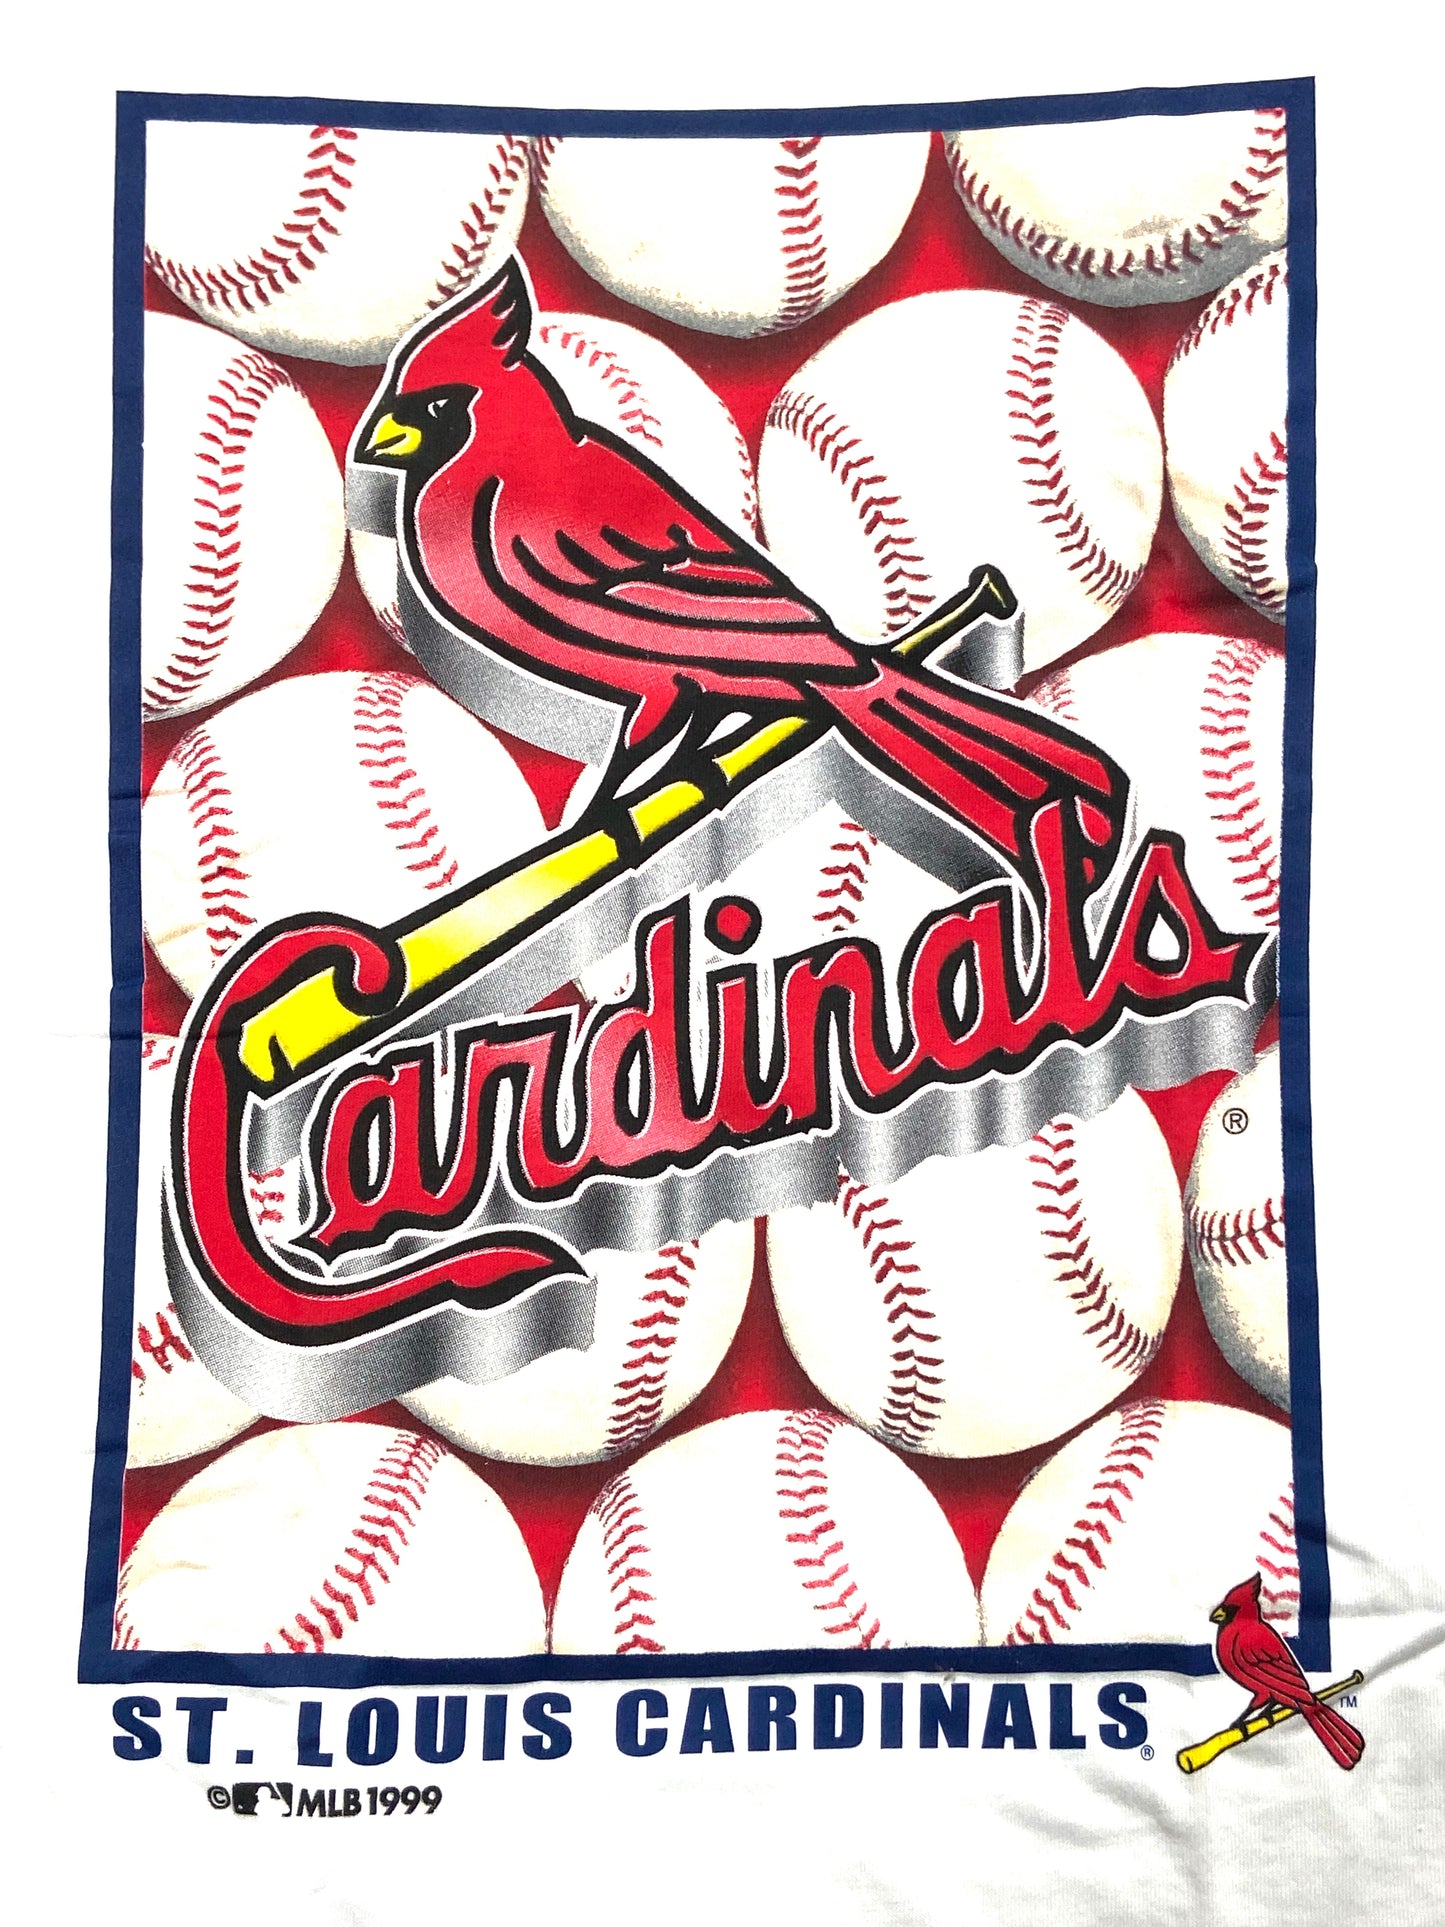 St. Louis Cardinals 1999 Vintage MLB Logo T-Shirt by College Concepts